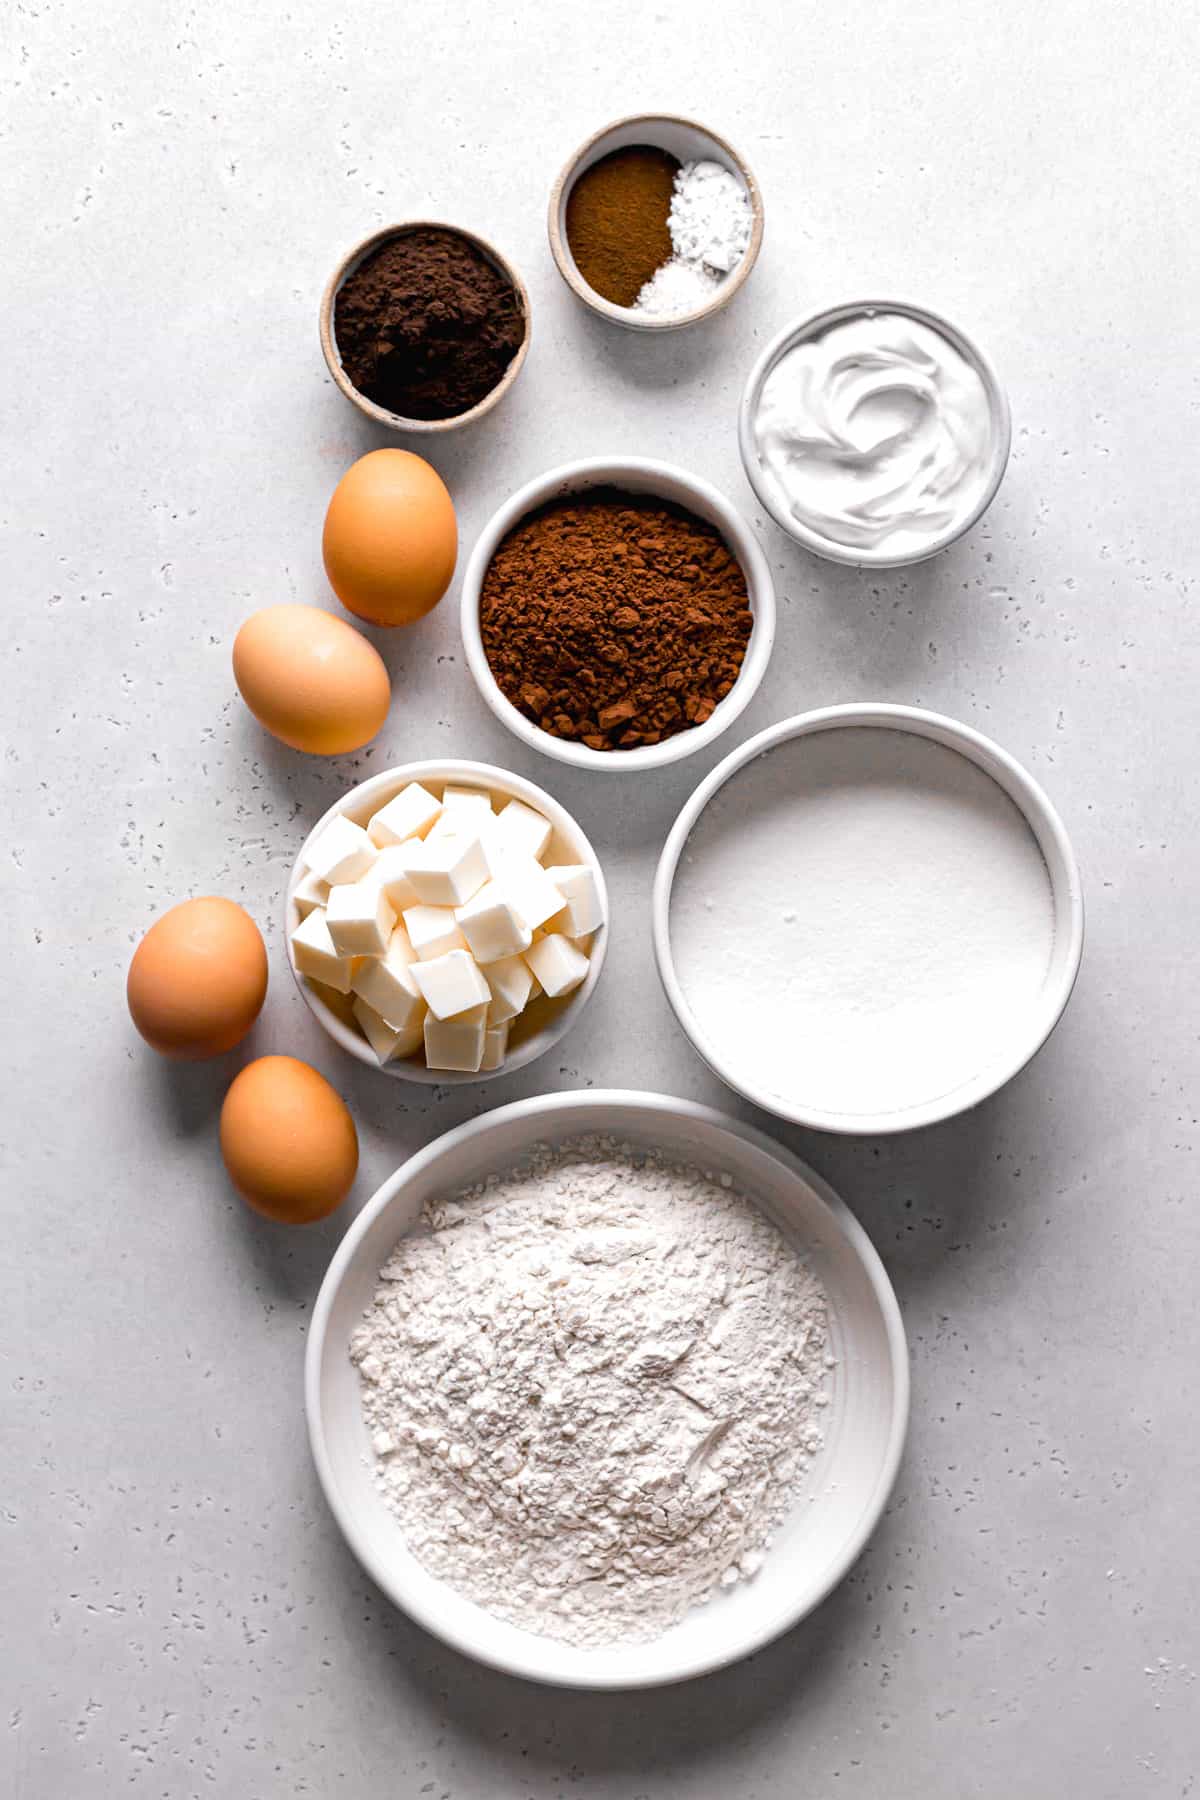 ingredients for chocolate pound cake recipe.